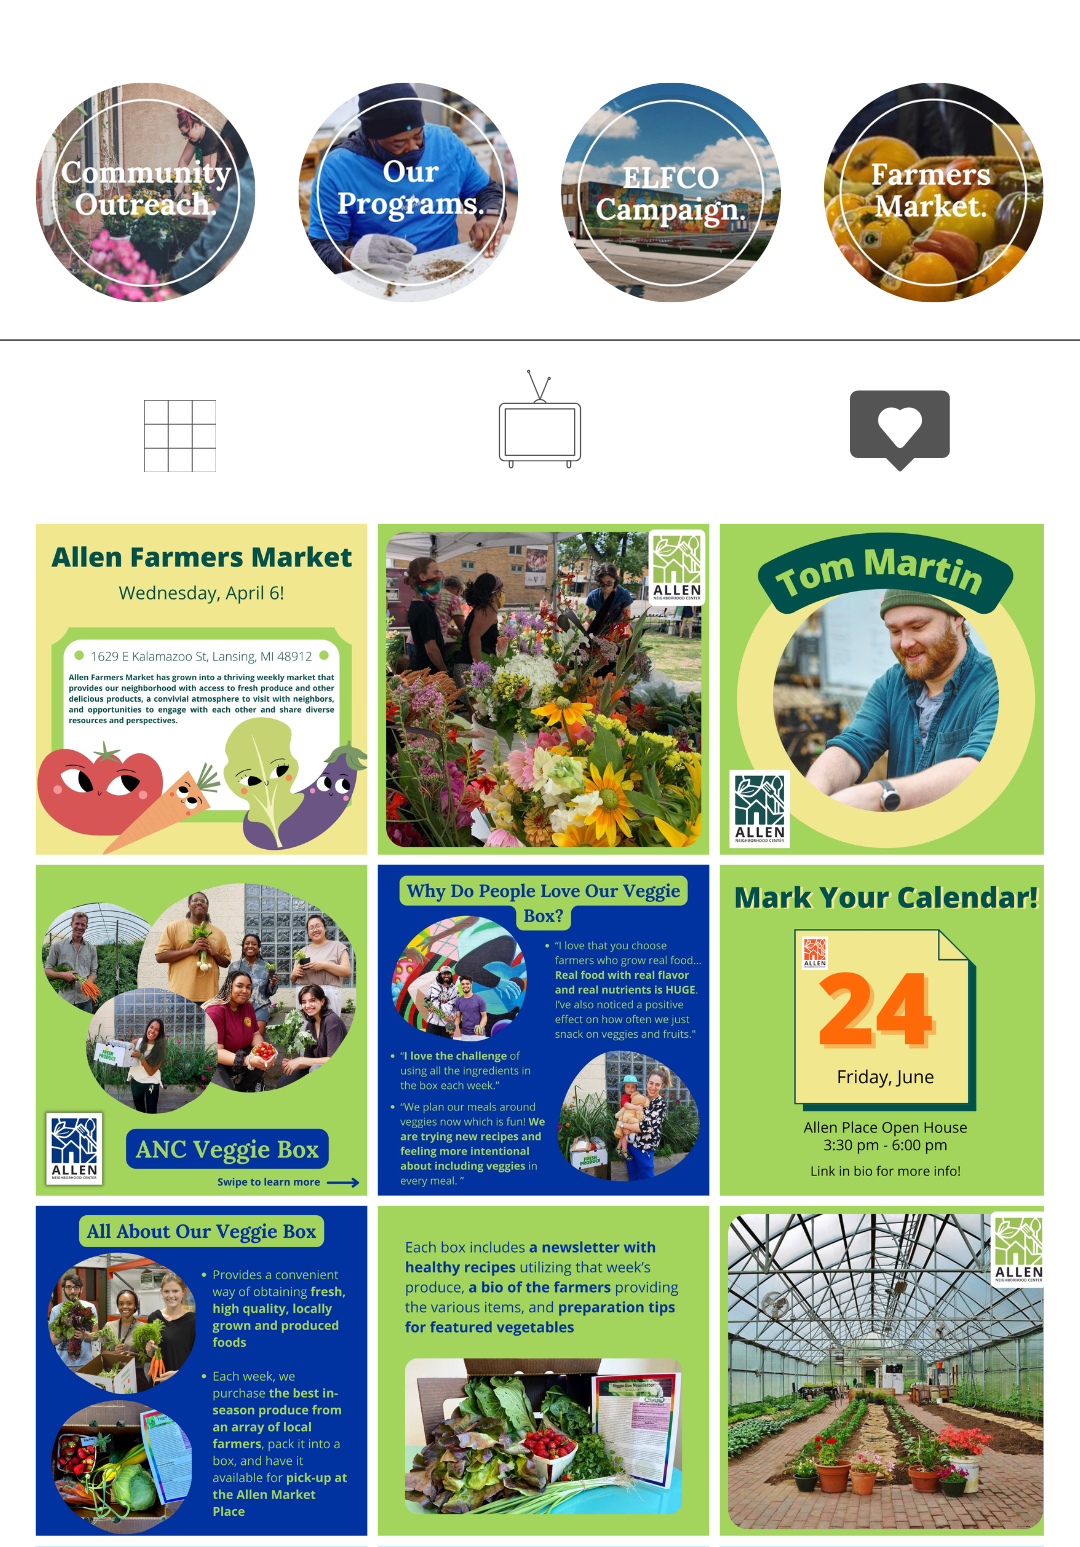 Instagram Page Mockup with Allen Neighborhood Center branding and graphics on topics like "Community Outreach," "Our Programs," "Allen Farmer's Market," and "Veggie Boxes"